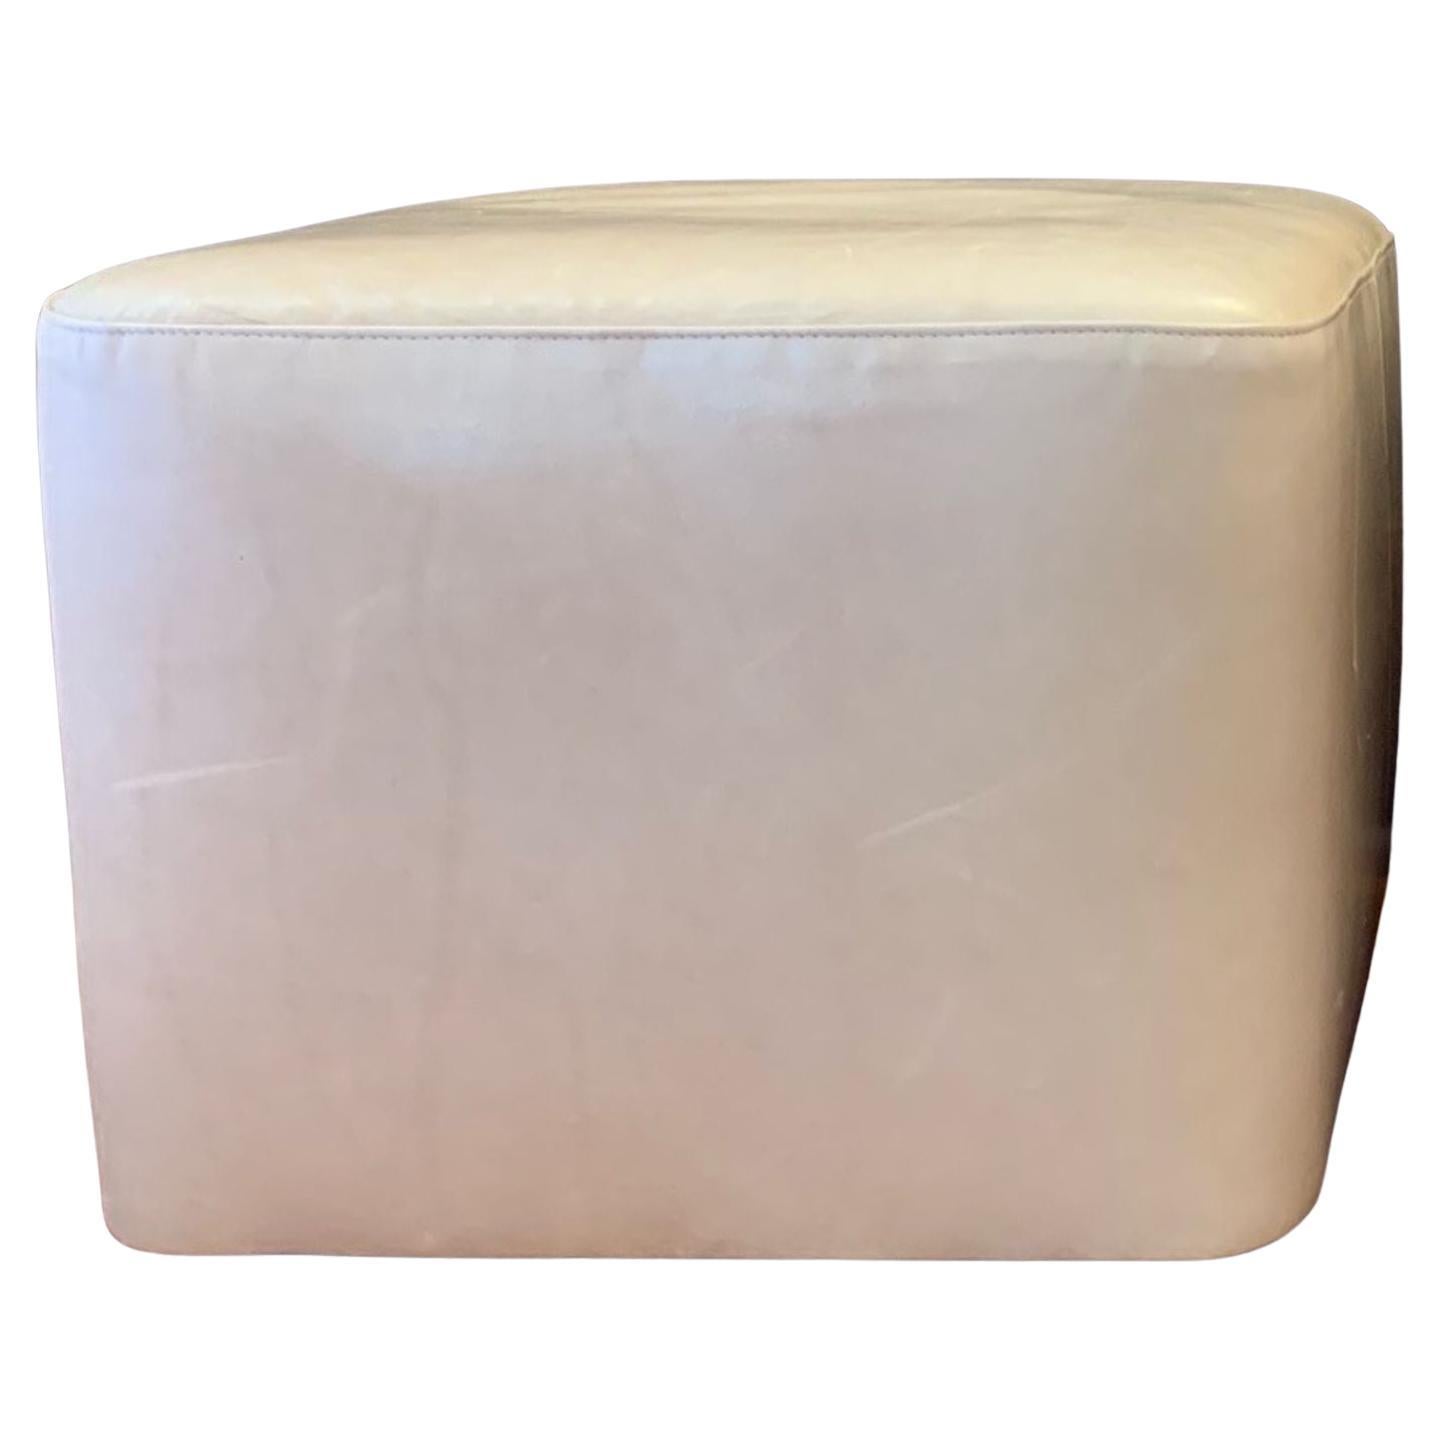 Pair of Contemporary Pale Pink Leather Ottoman Seat on Caster Wheels For Sale